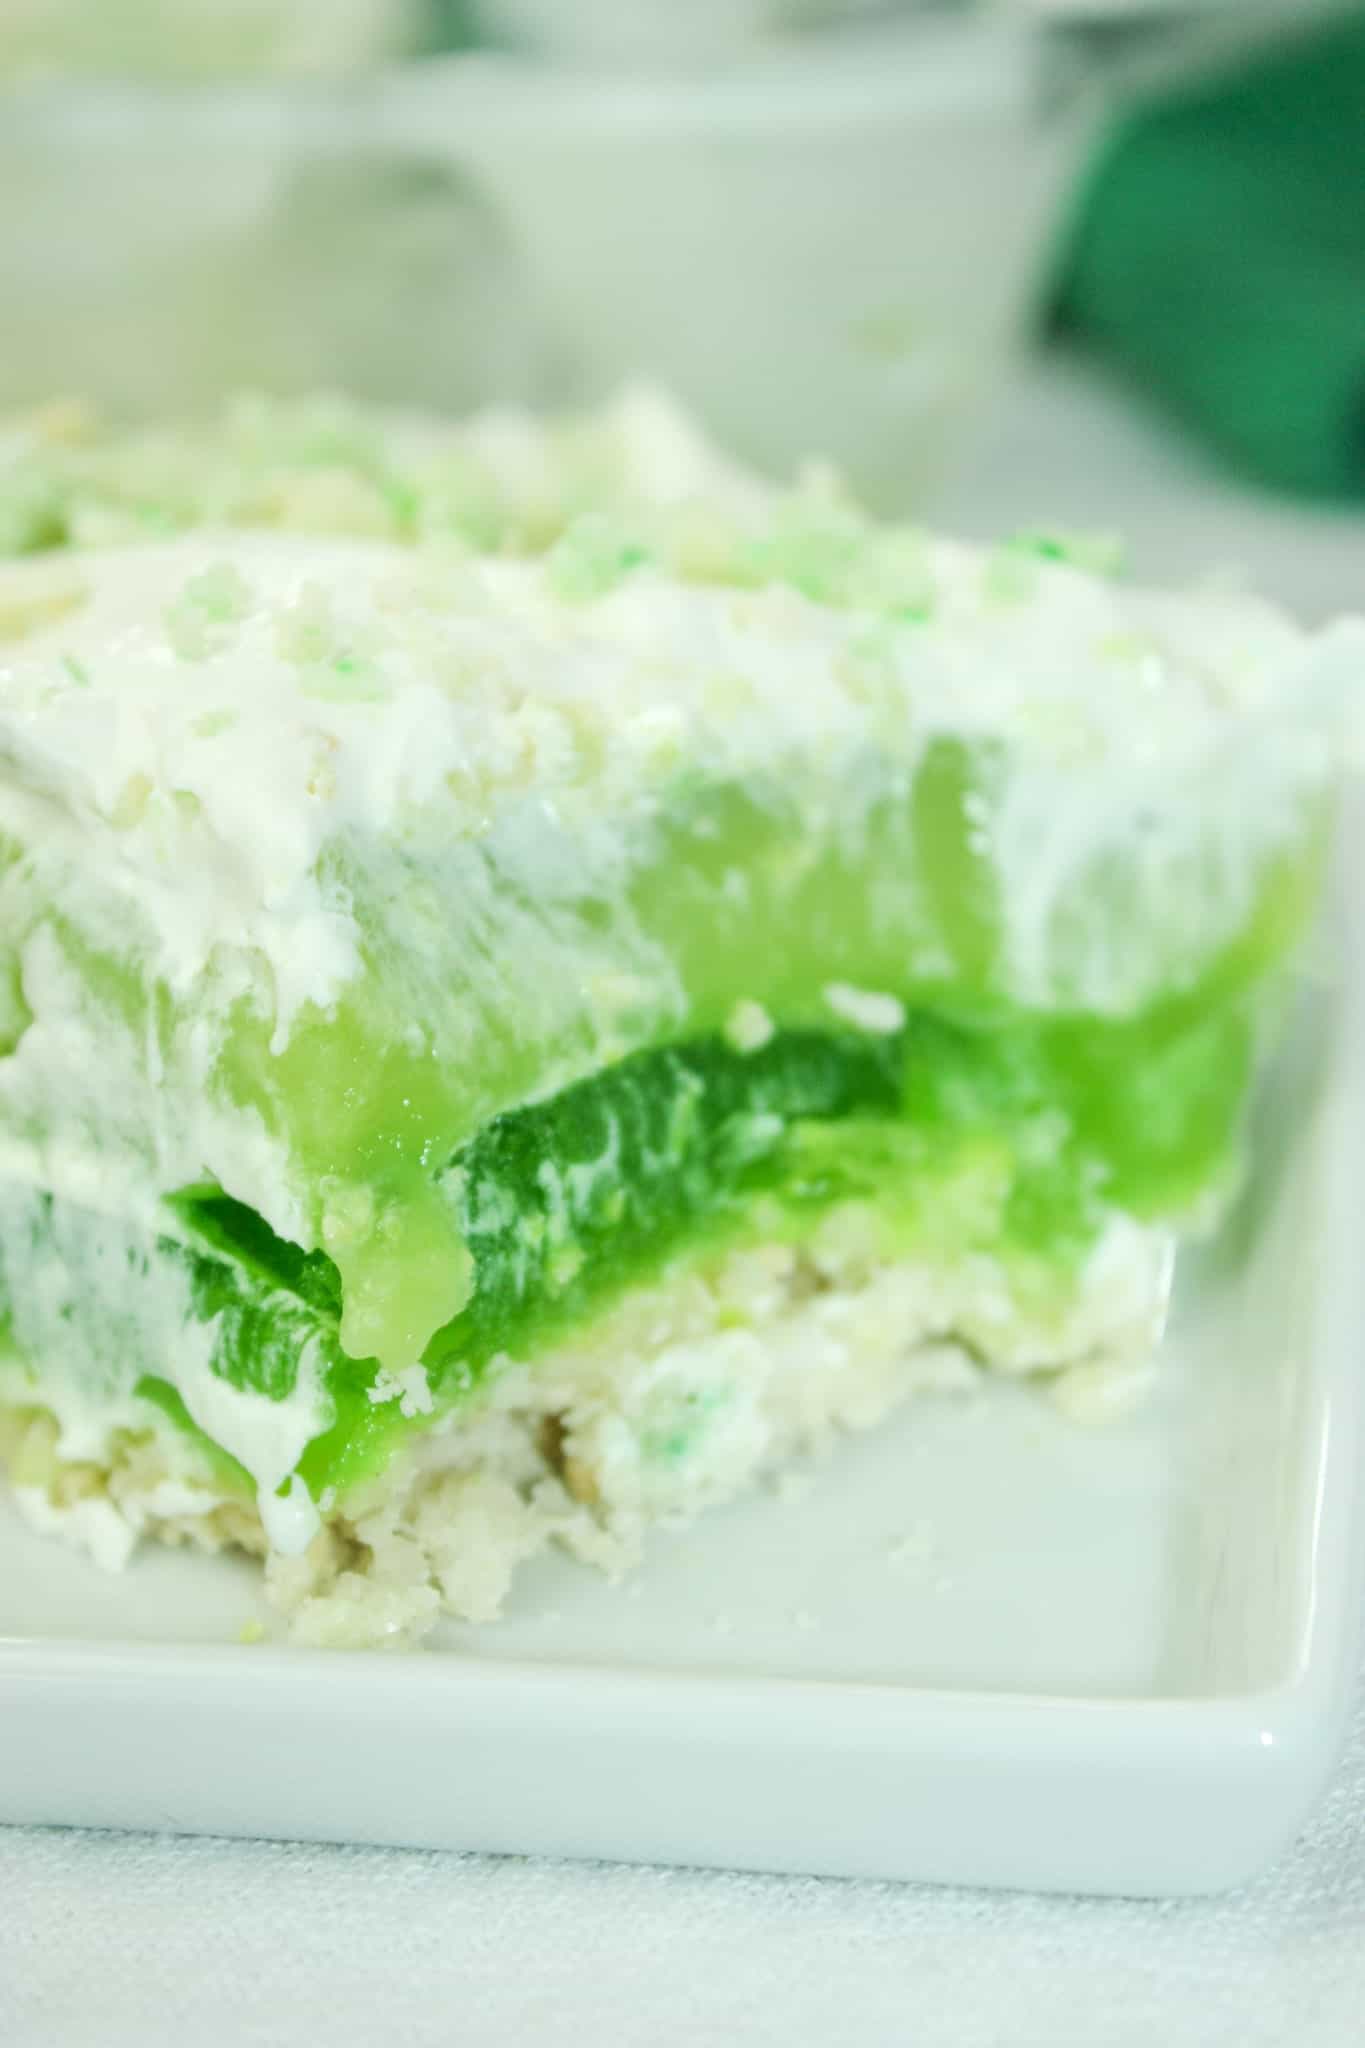 Layered Lime Dessert Squares are a nice light dessert option.  The layers of green make it the perfect choice for a St. Patrick's Day celebration.